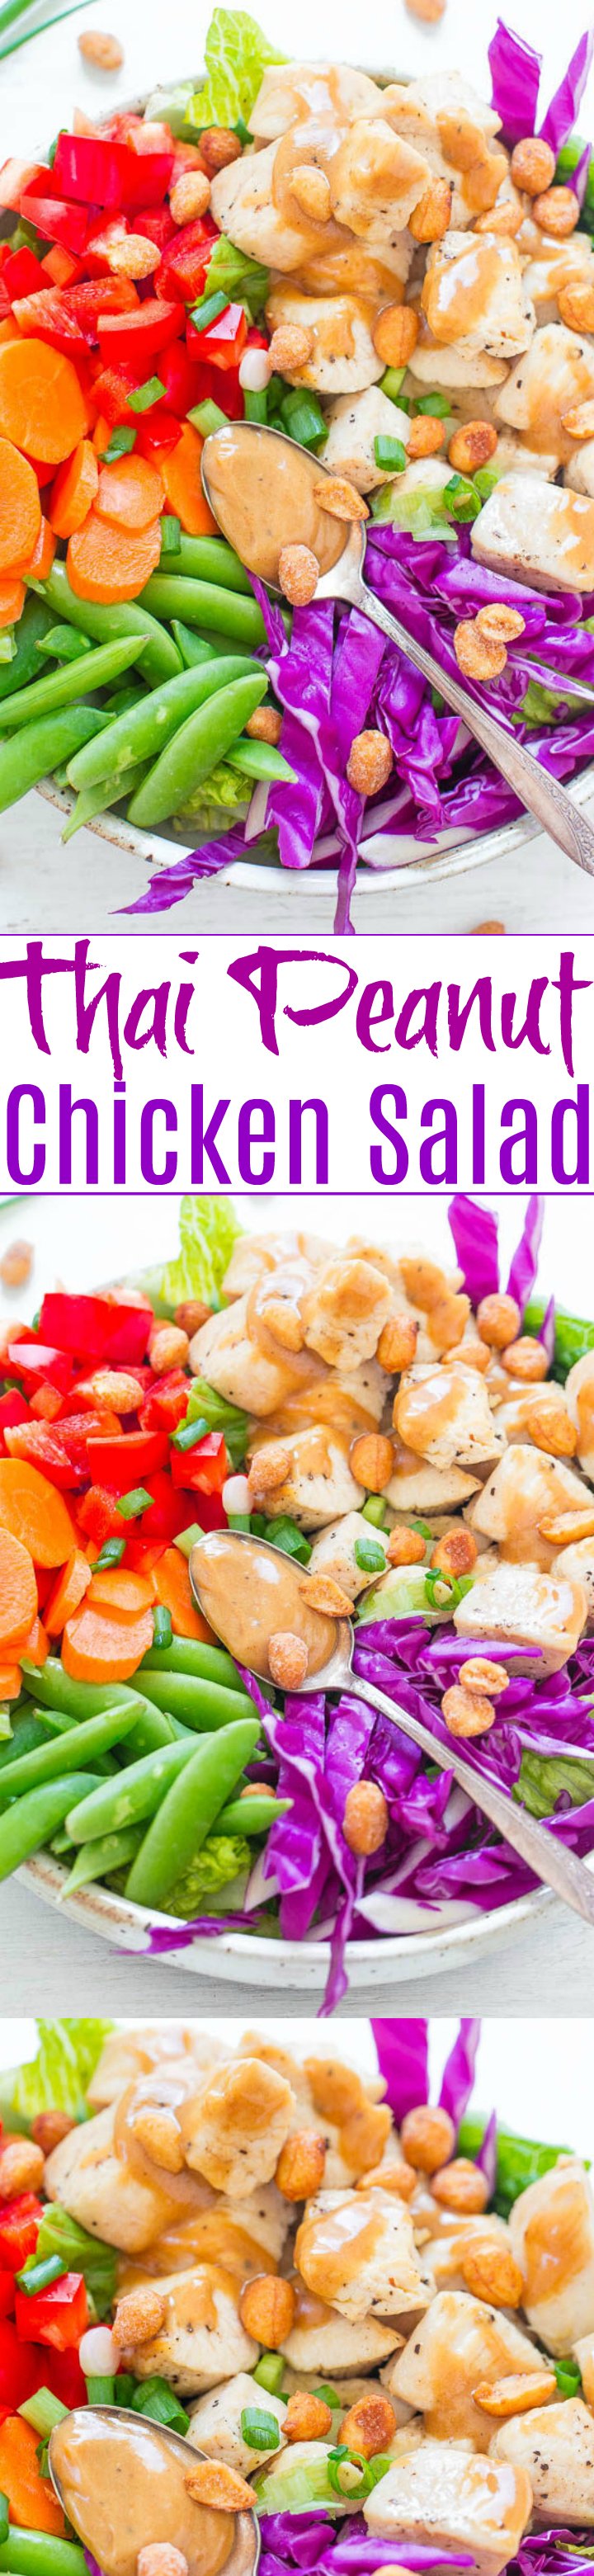 Thai Peanut Salad — Eat the RAINBOW with this EASY, healthy salad that's ready in 20 minutes!! Juicy chicken and crisp vegetables are tossed in the BEST PEANUT SALAD DRESSING ever!!